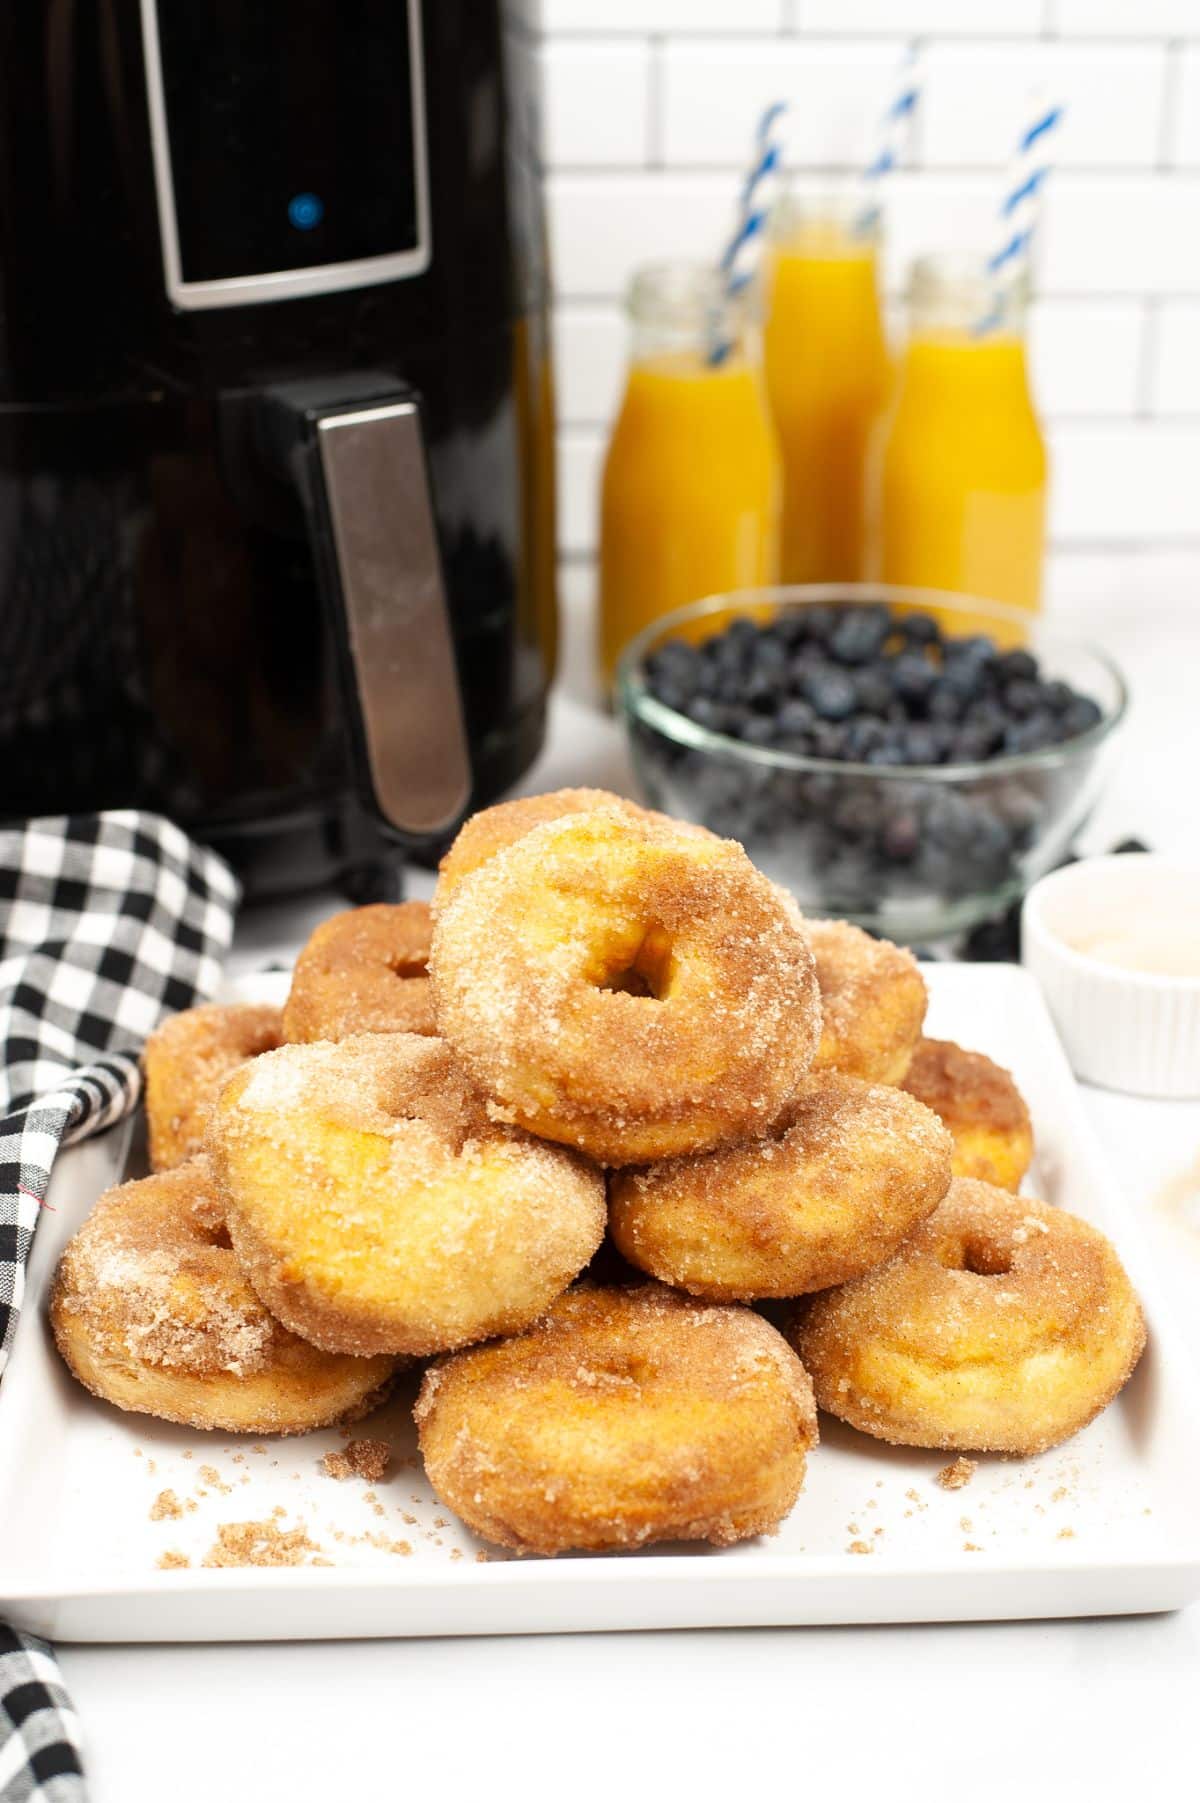 Plate of cinnamon sugar air fryer biscuit donuts in front of bowl of blueberries, glasses of orange juice and an air fryer